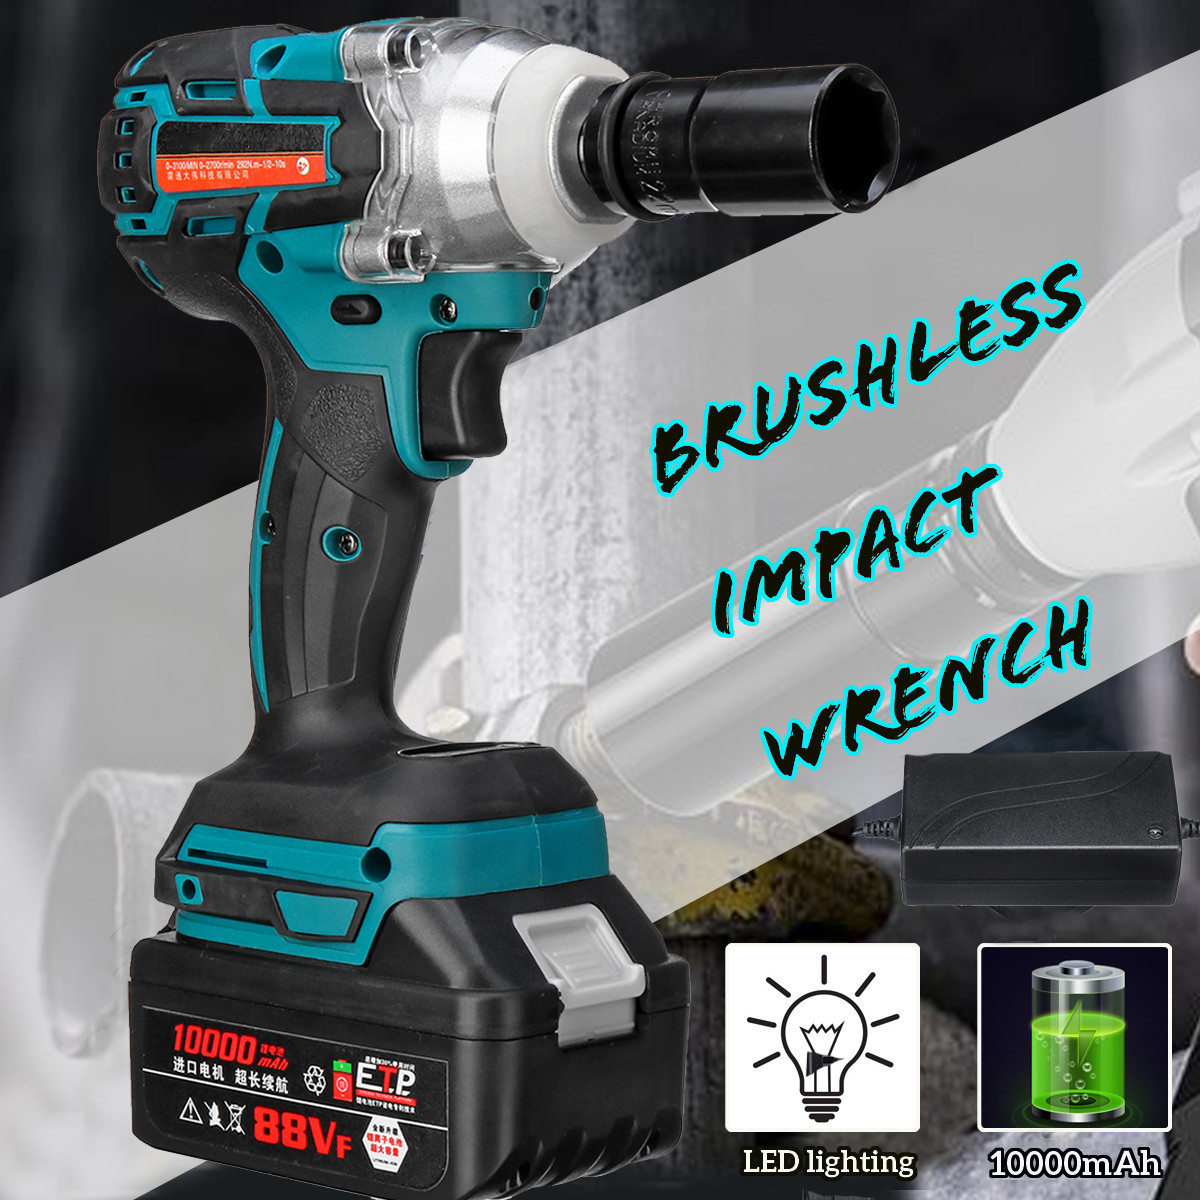 21V-330Nm-10000mAh-Lithium-Electric-Impact-Wrench-Cordless-with-2-Batteries-1399342-2